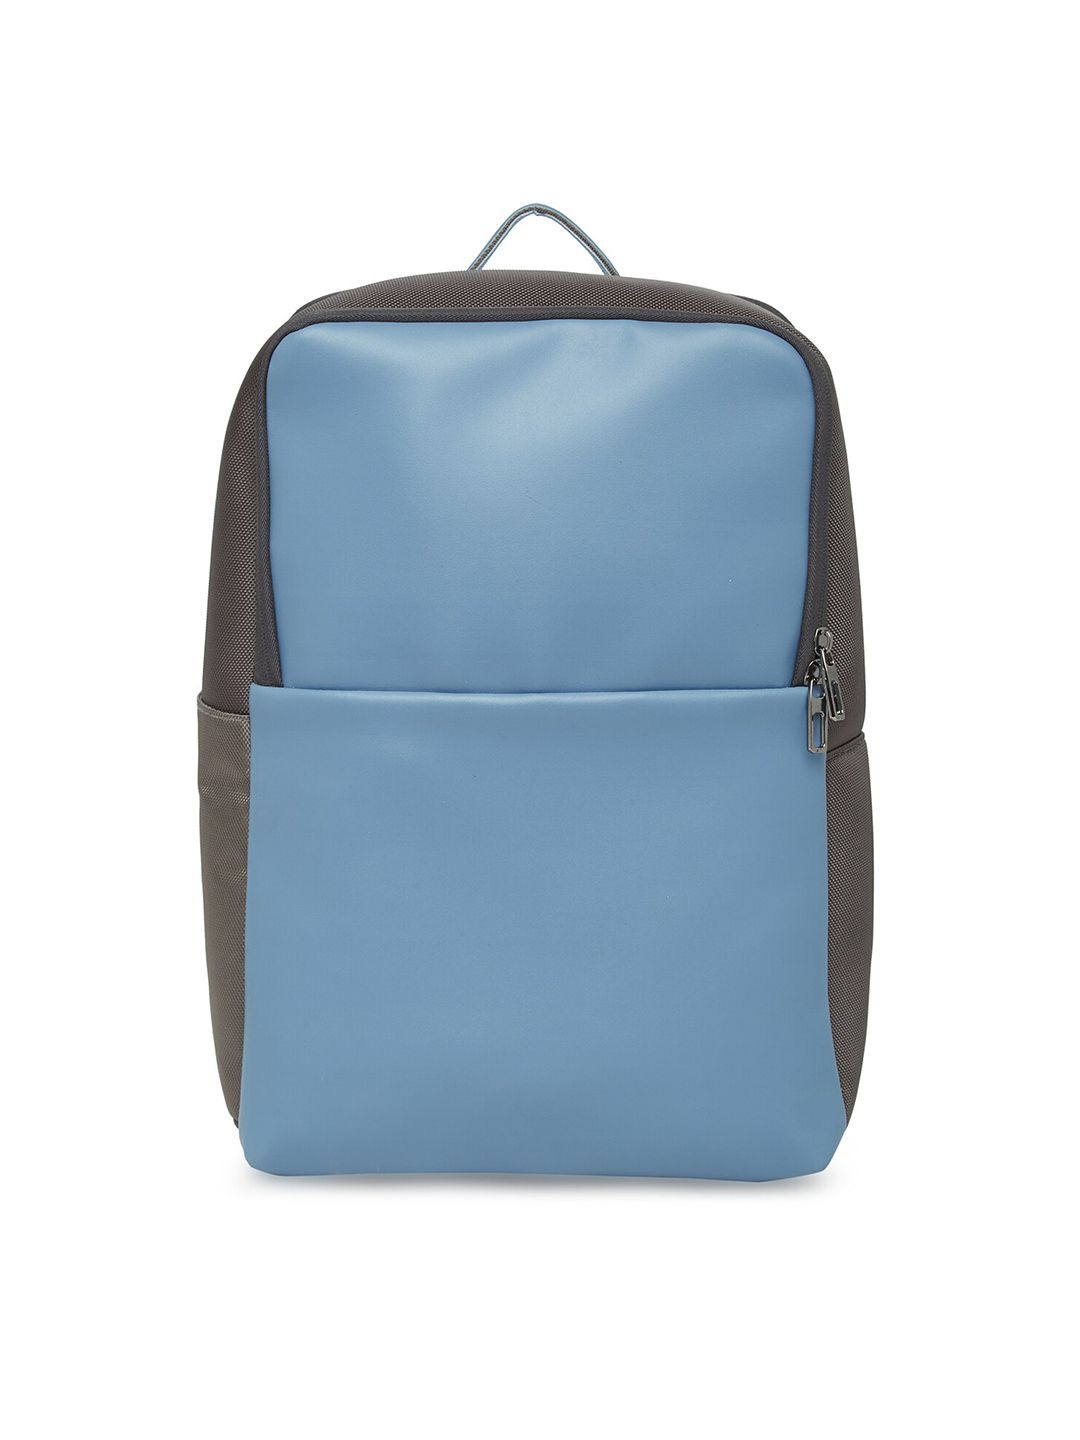 MBOSS Unisex Blue & Black Backpack Price in India